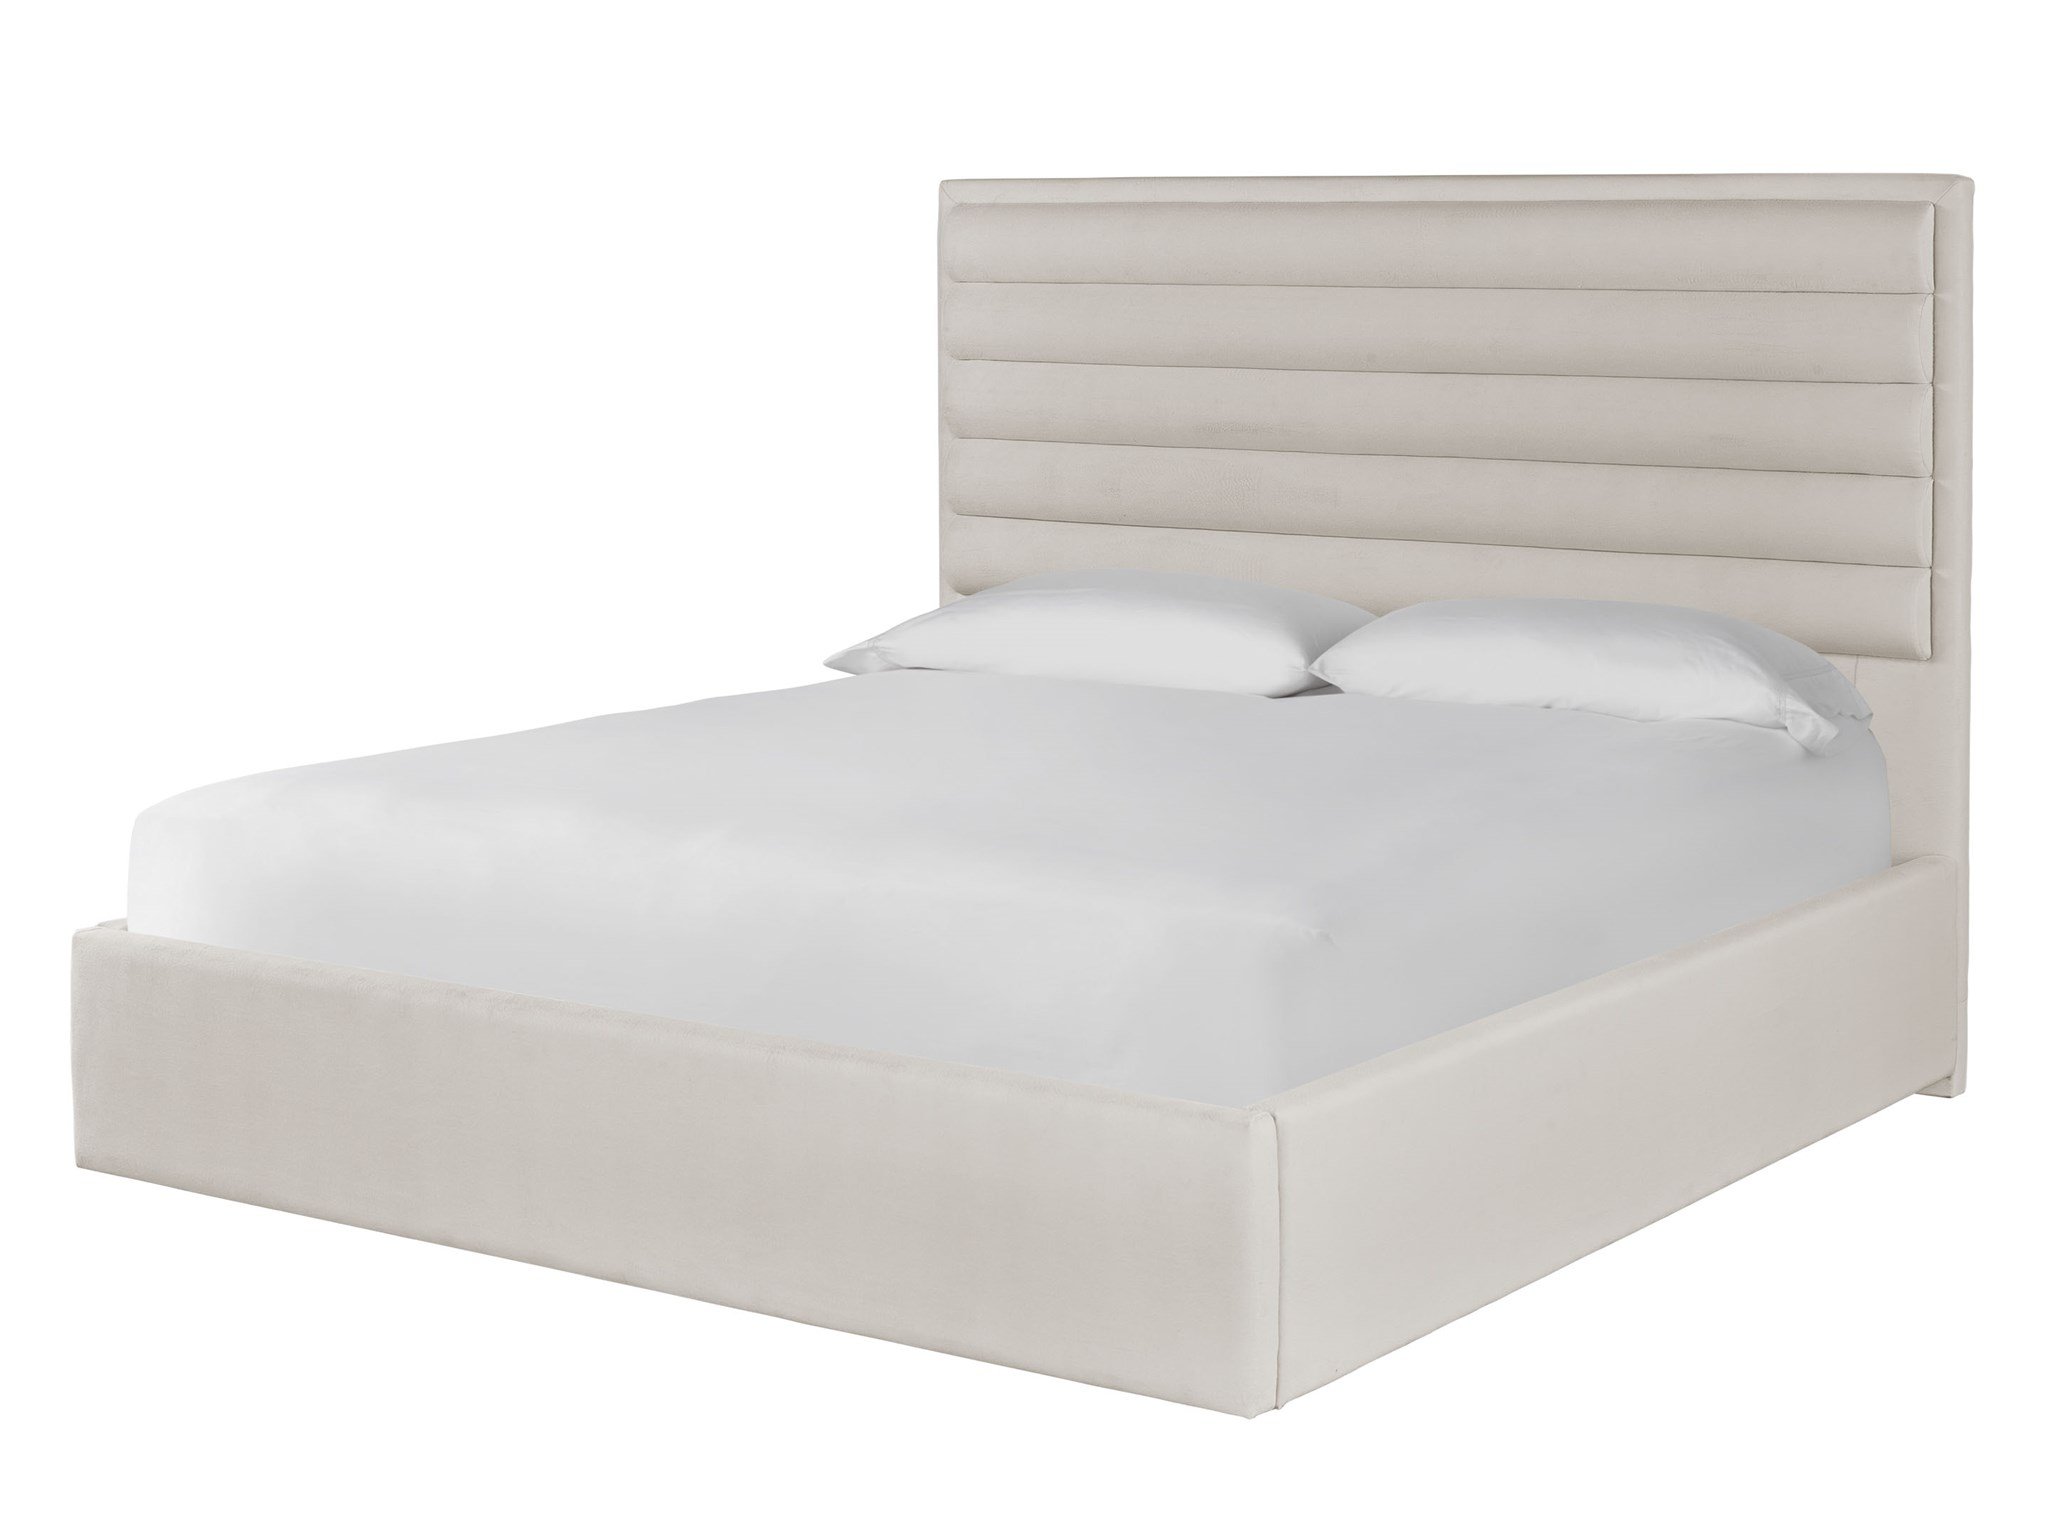 Tranquility Upholstered Bed King